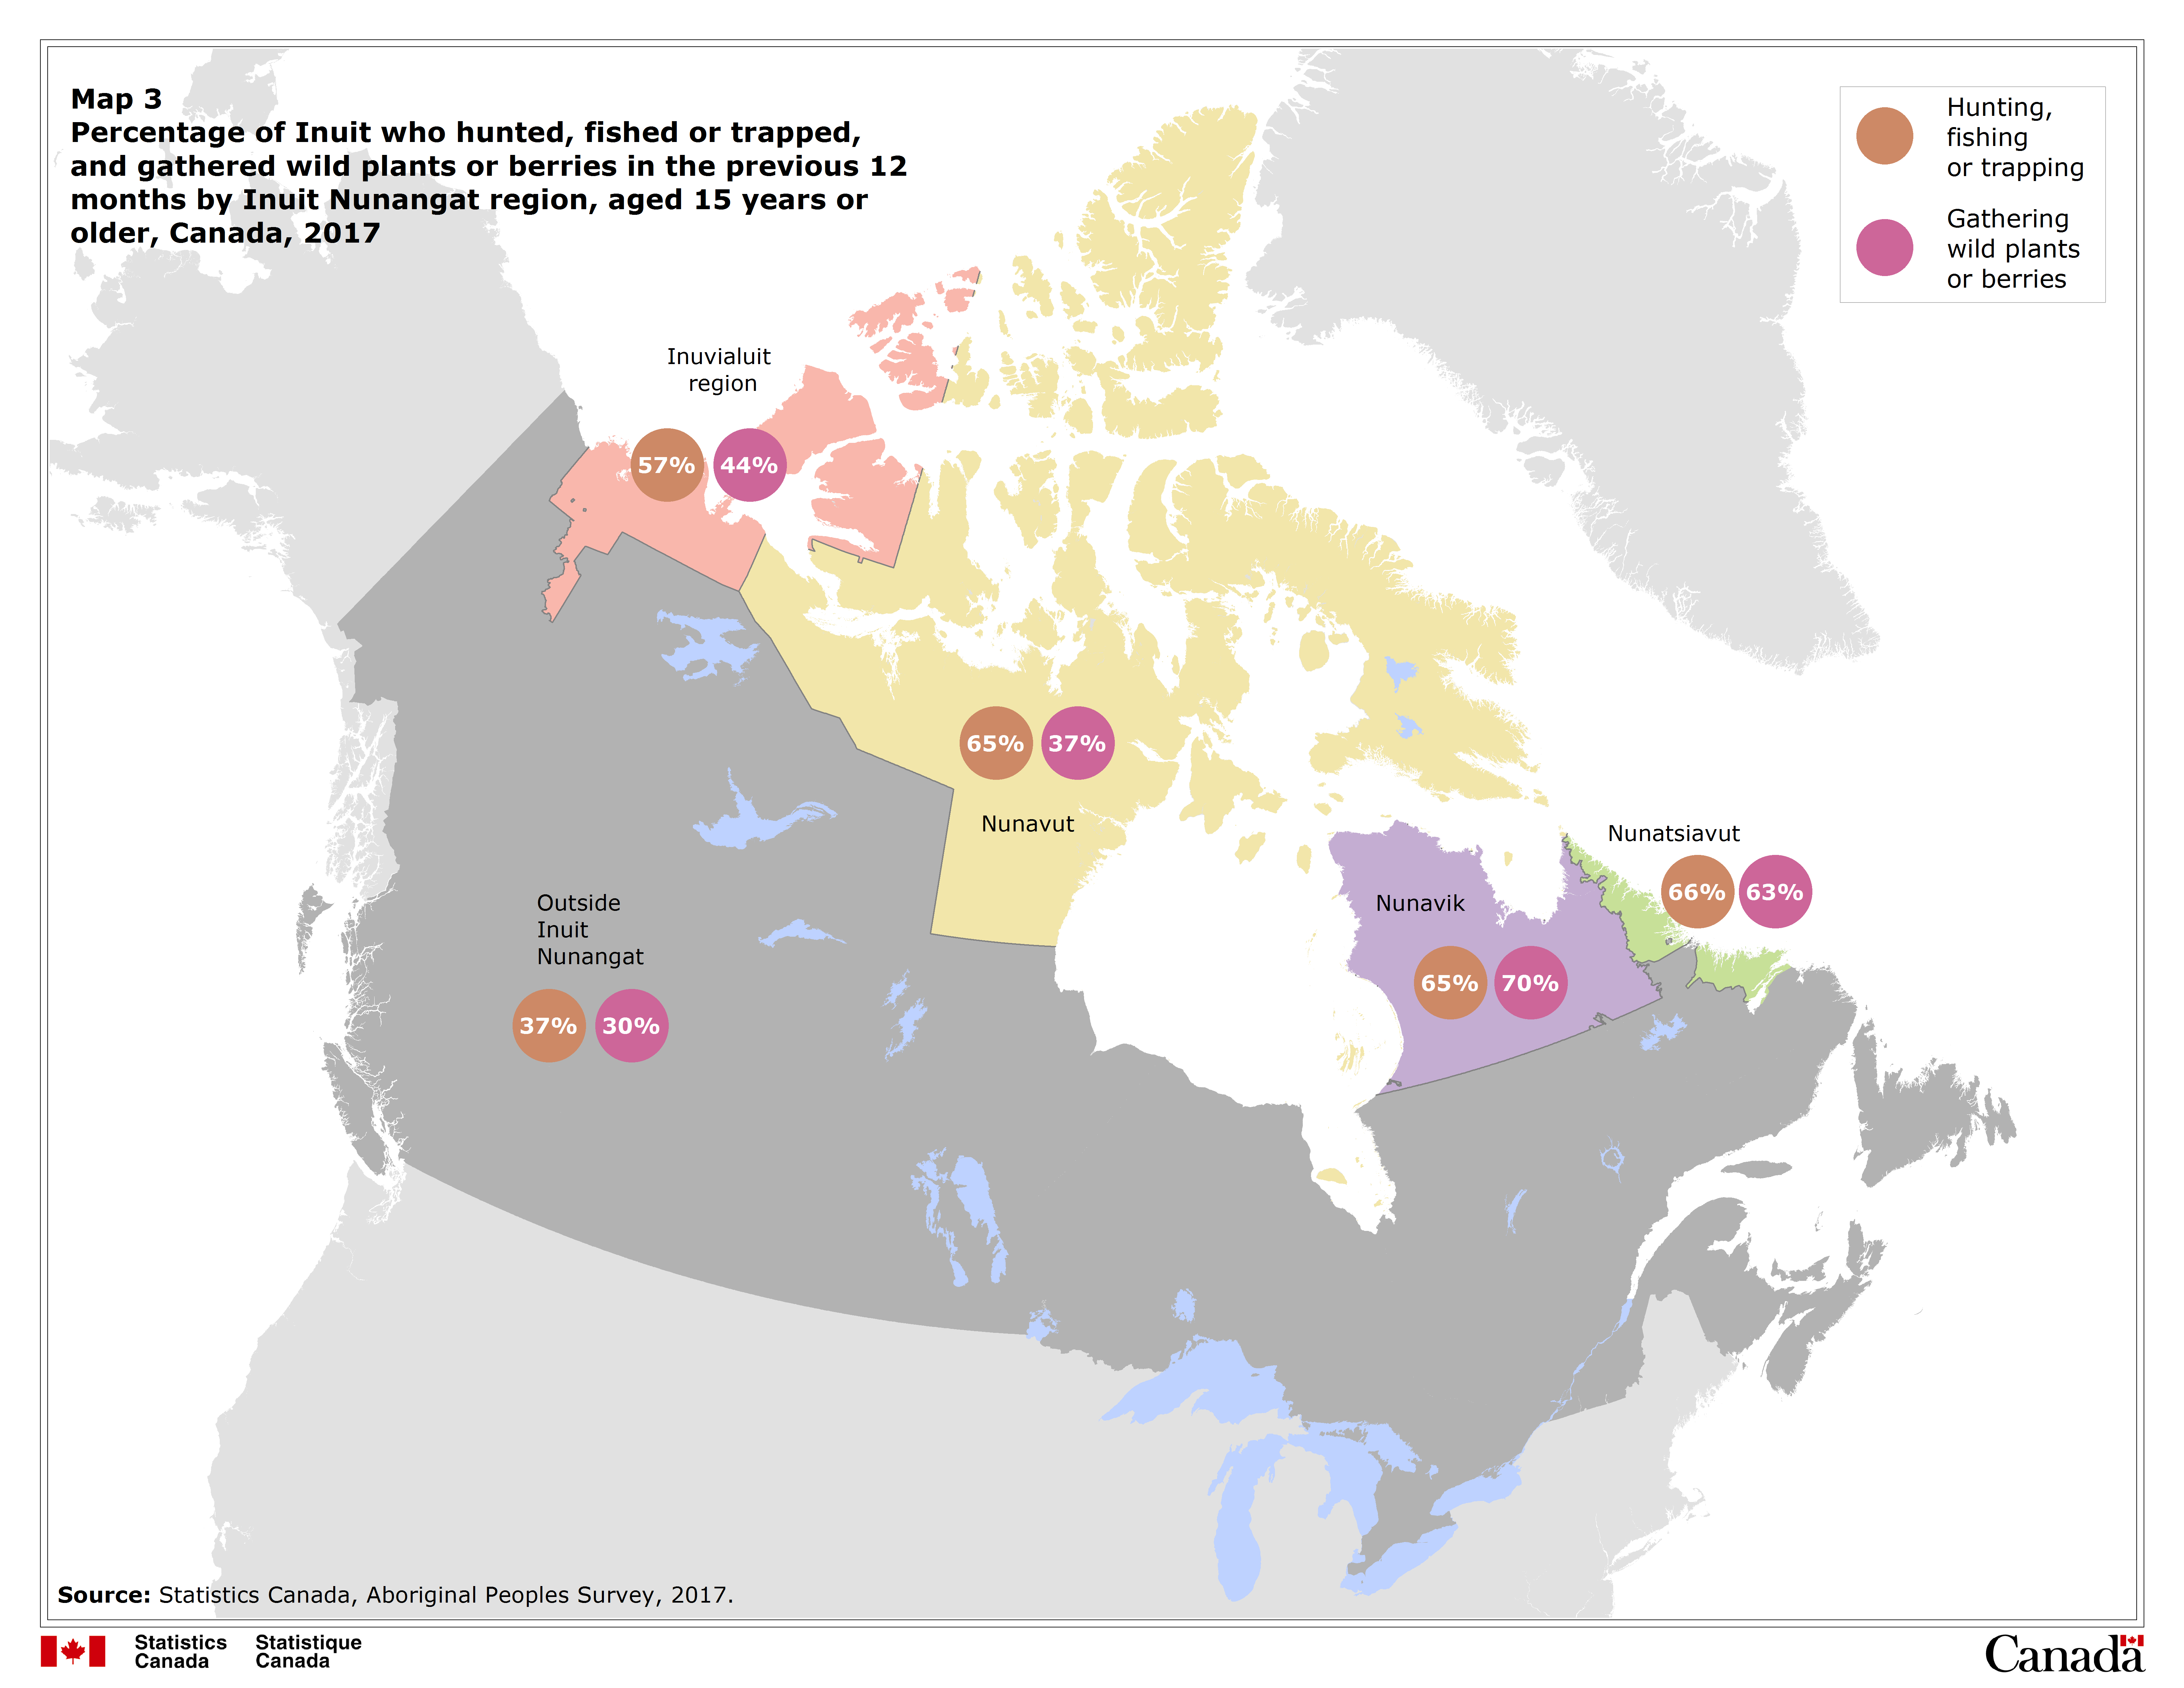 Map 3 Percentage of Inuit who hunted, fished or trapped, and gathered wild plants or berries in the previous 12 months by Inuit Nunangat region, aged 15 years or older, Canada, 2017